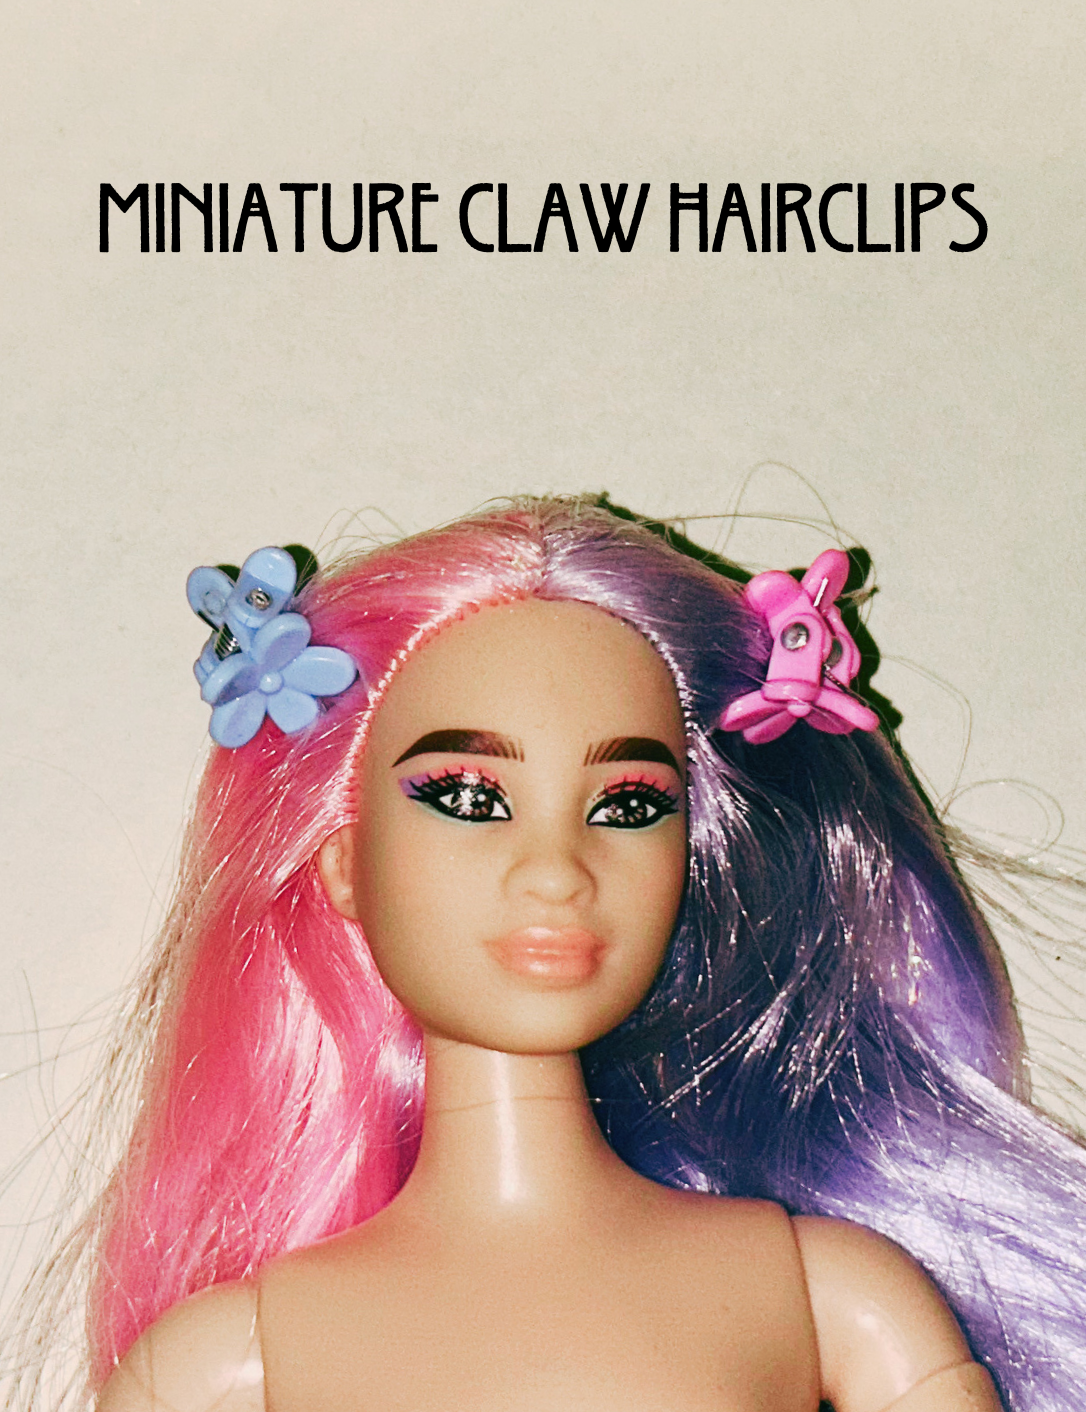 Miniature Claw Hairclips for Fashion Dolls